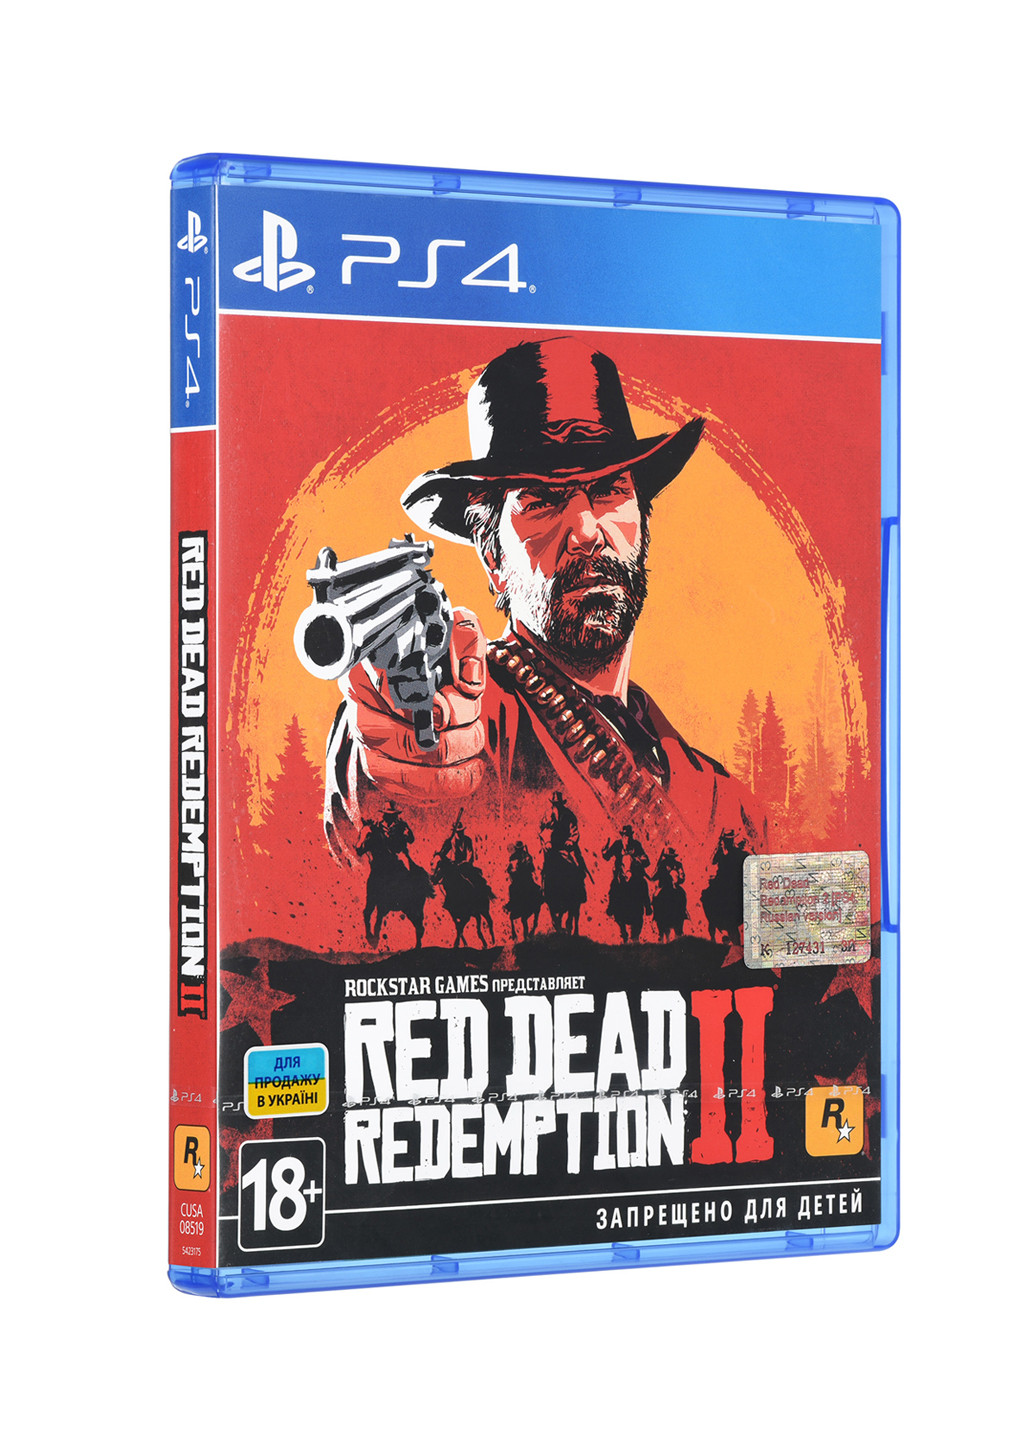 Games Software игра ps4 red dead redemption 2 [blu-ray диск] (150134268)